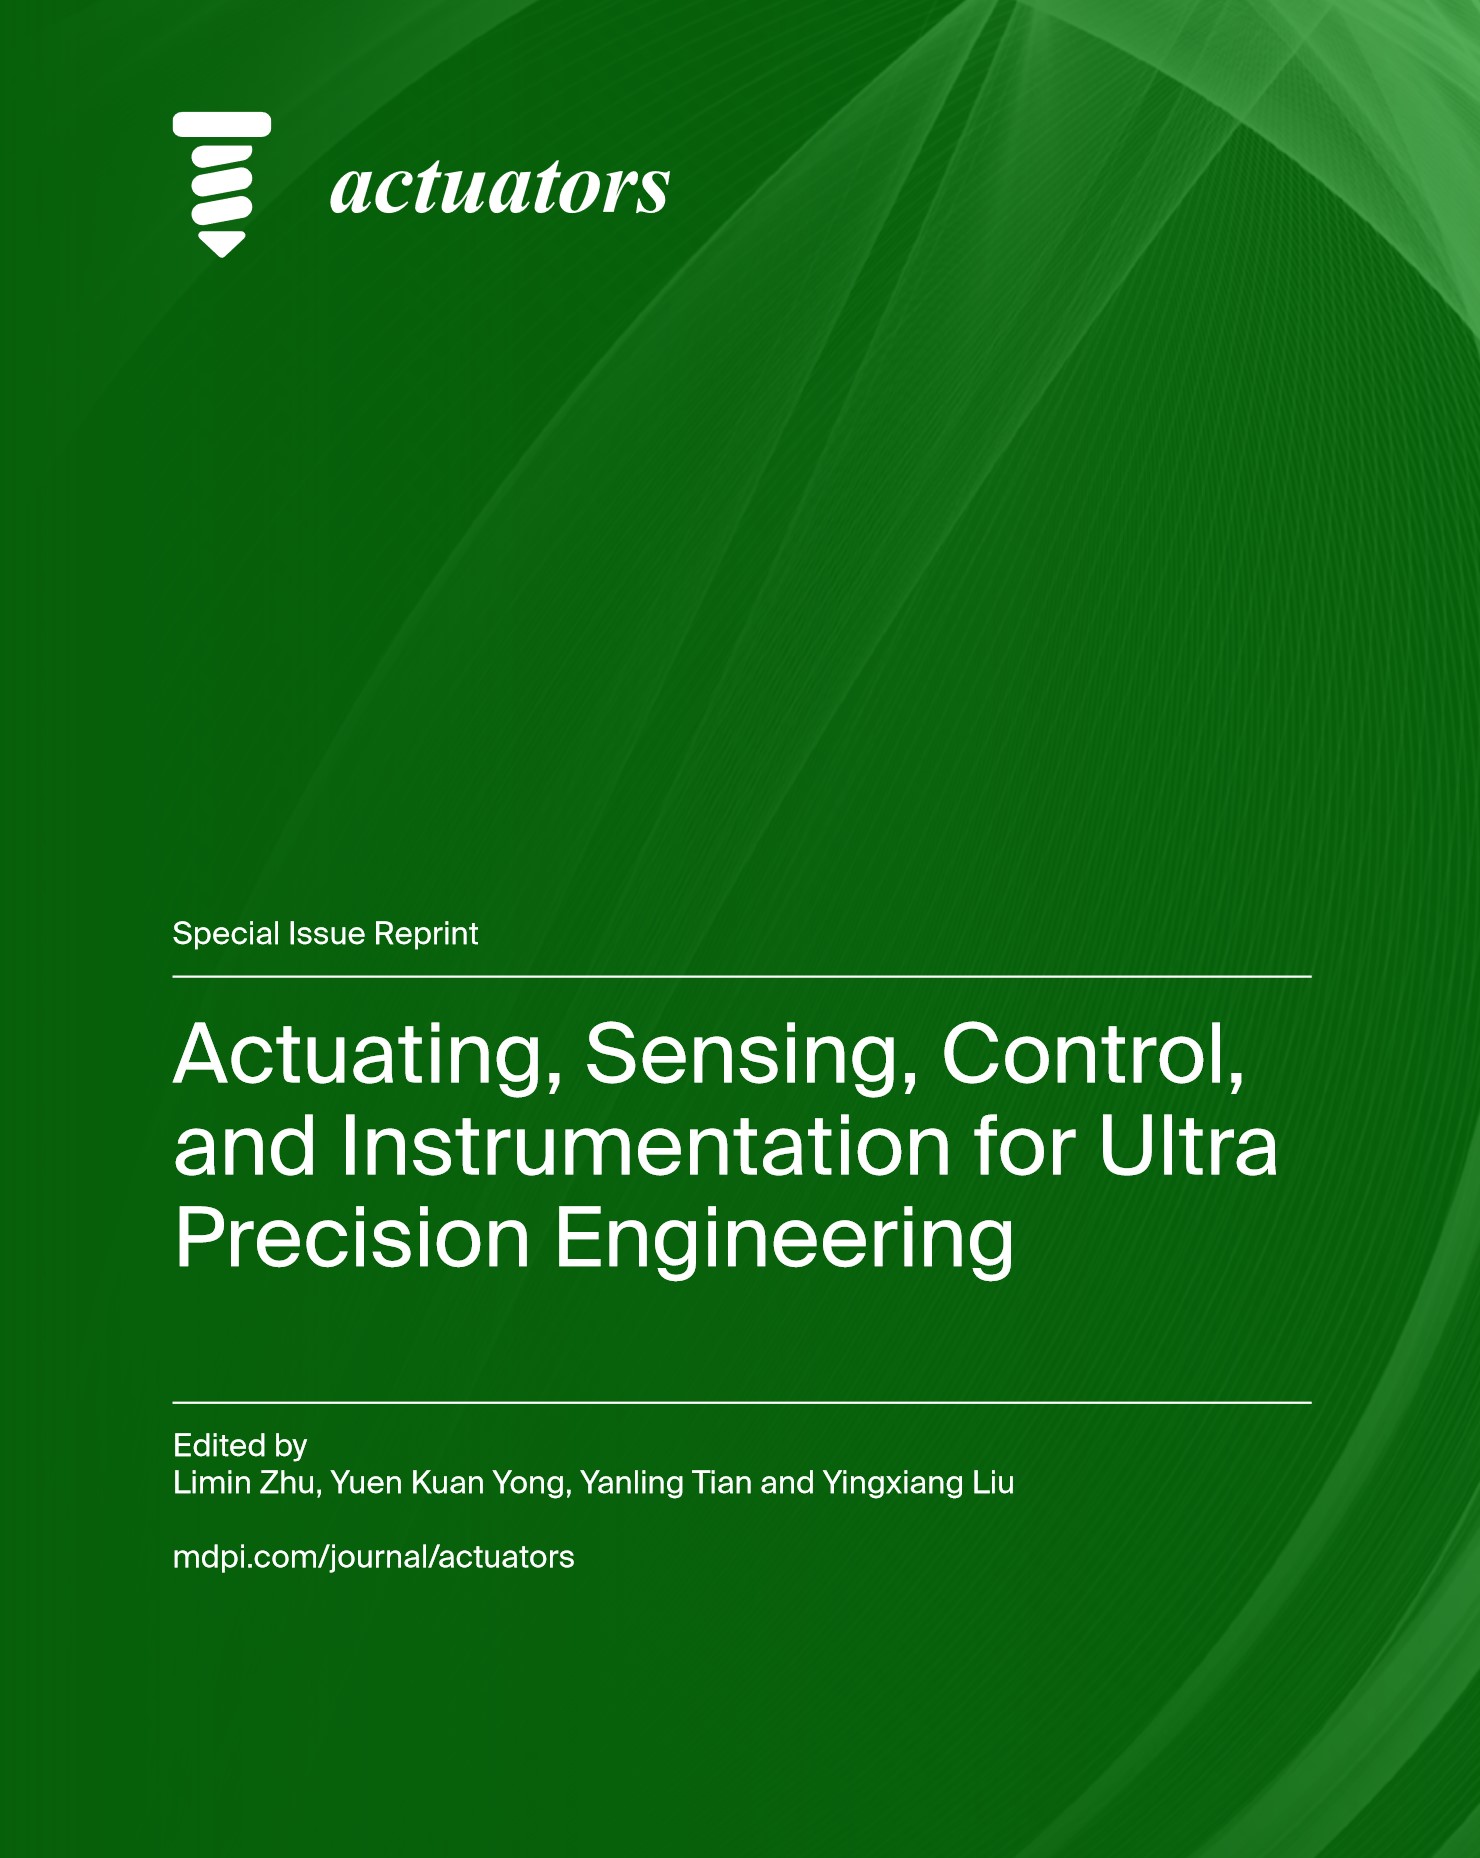 Actuating, Sensing, Control, and Instrumentation for Ultra Precision Engineering